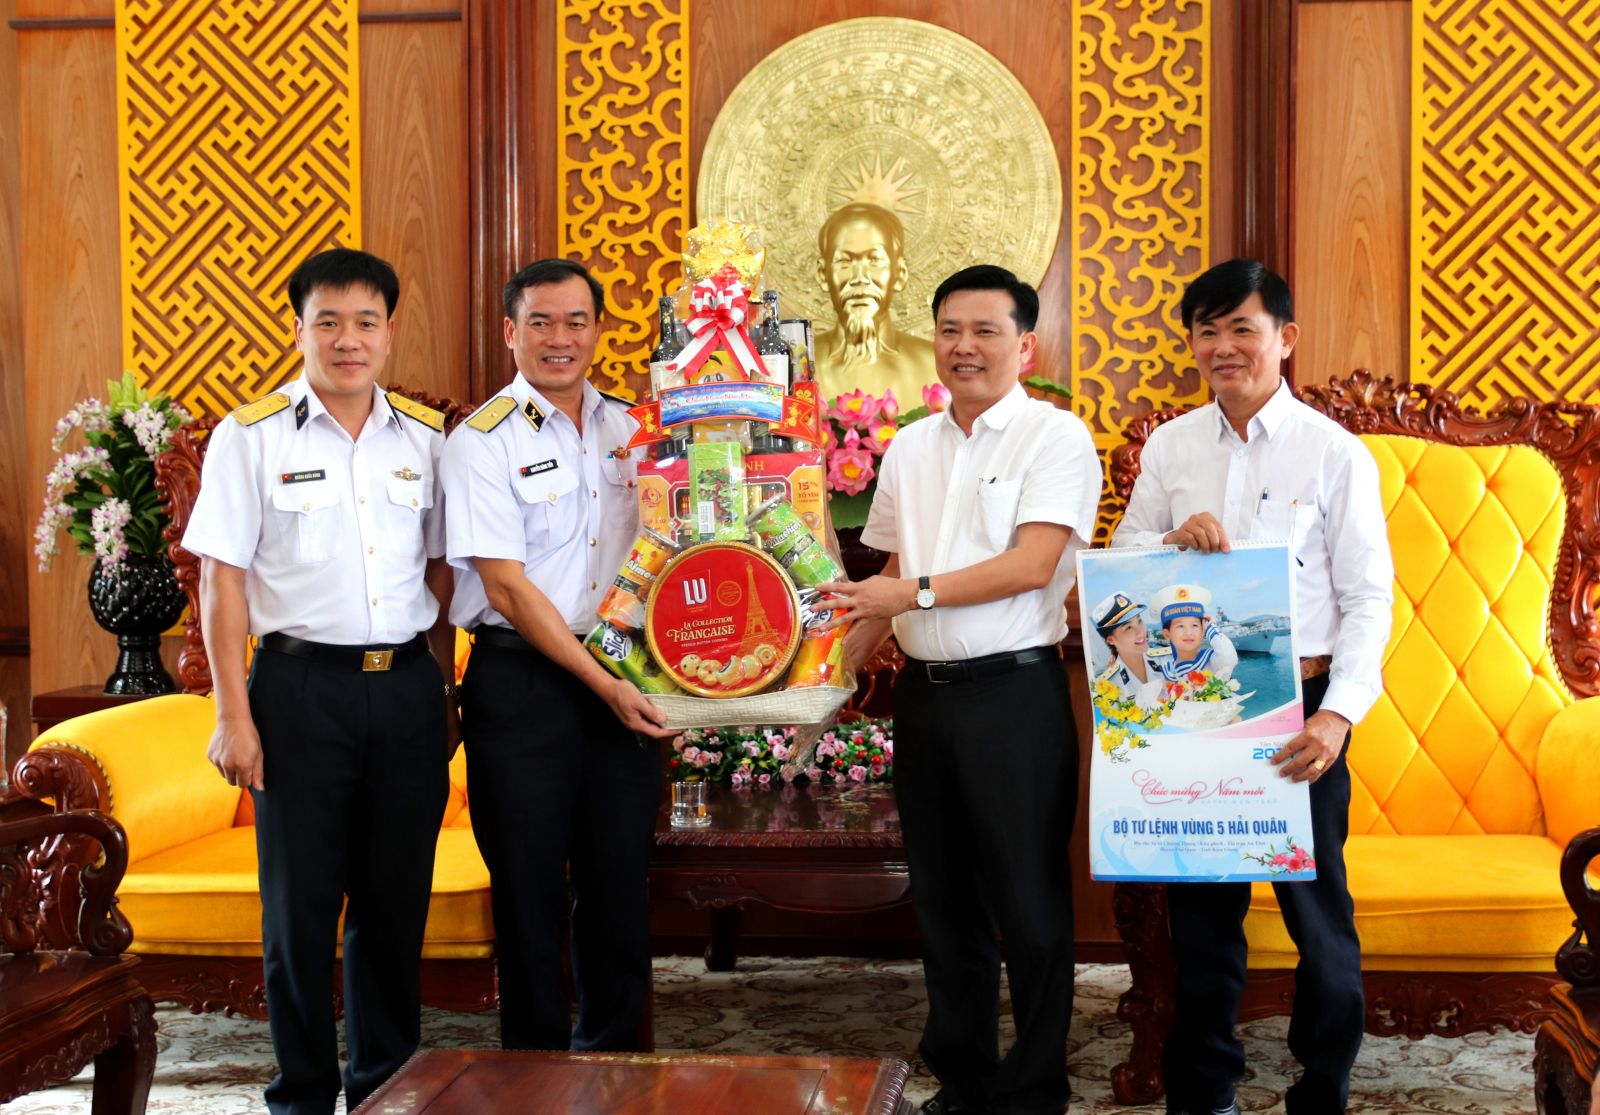 Delegation of Naval Region 5 Command visits, wishes Lunar New Year in Long An on the occasion of Lunar New Year of Buffalo 2021 